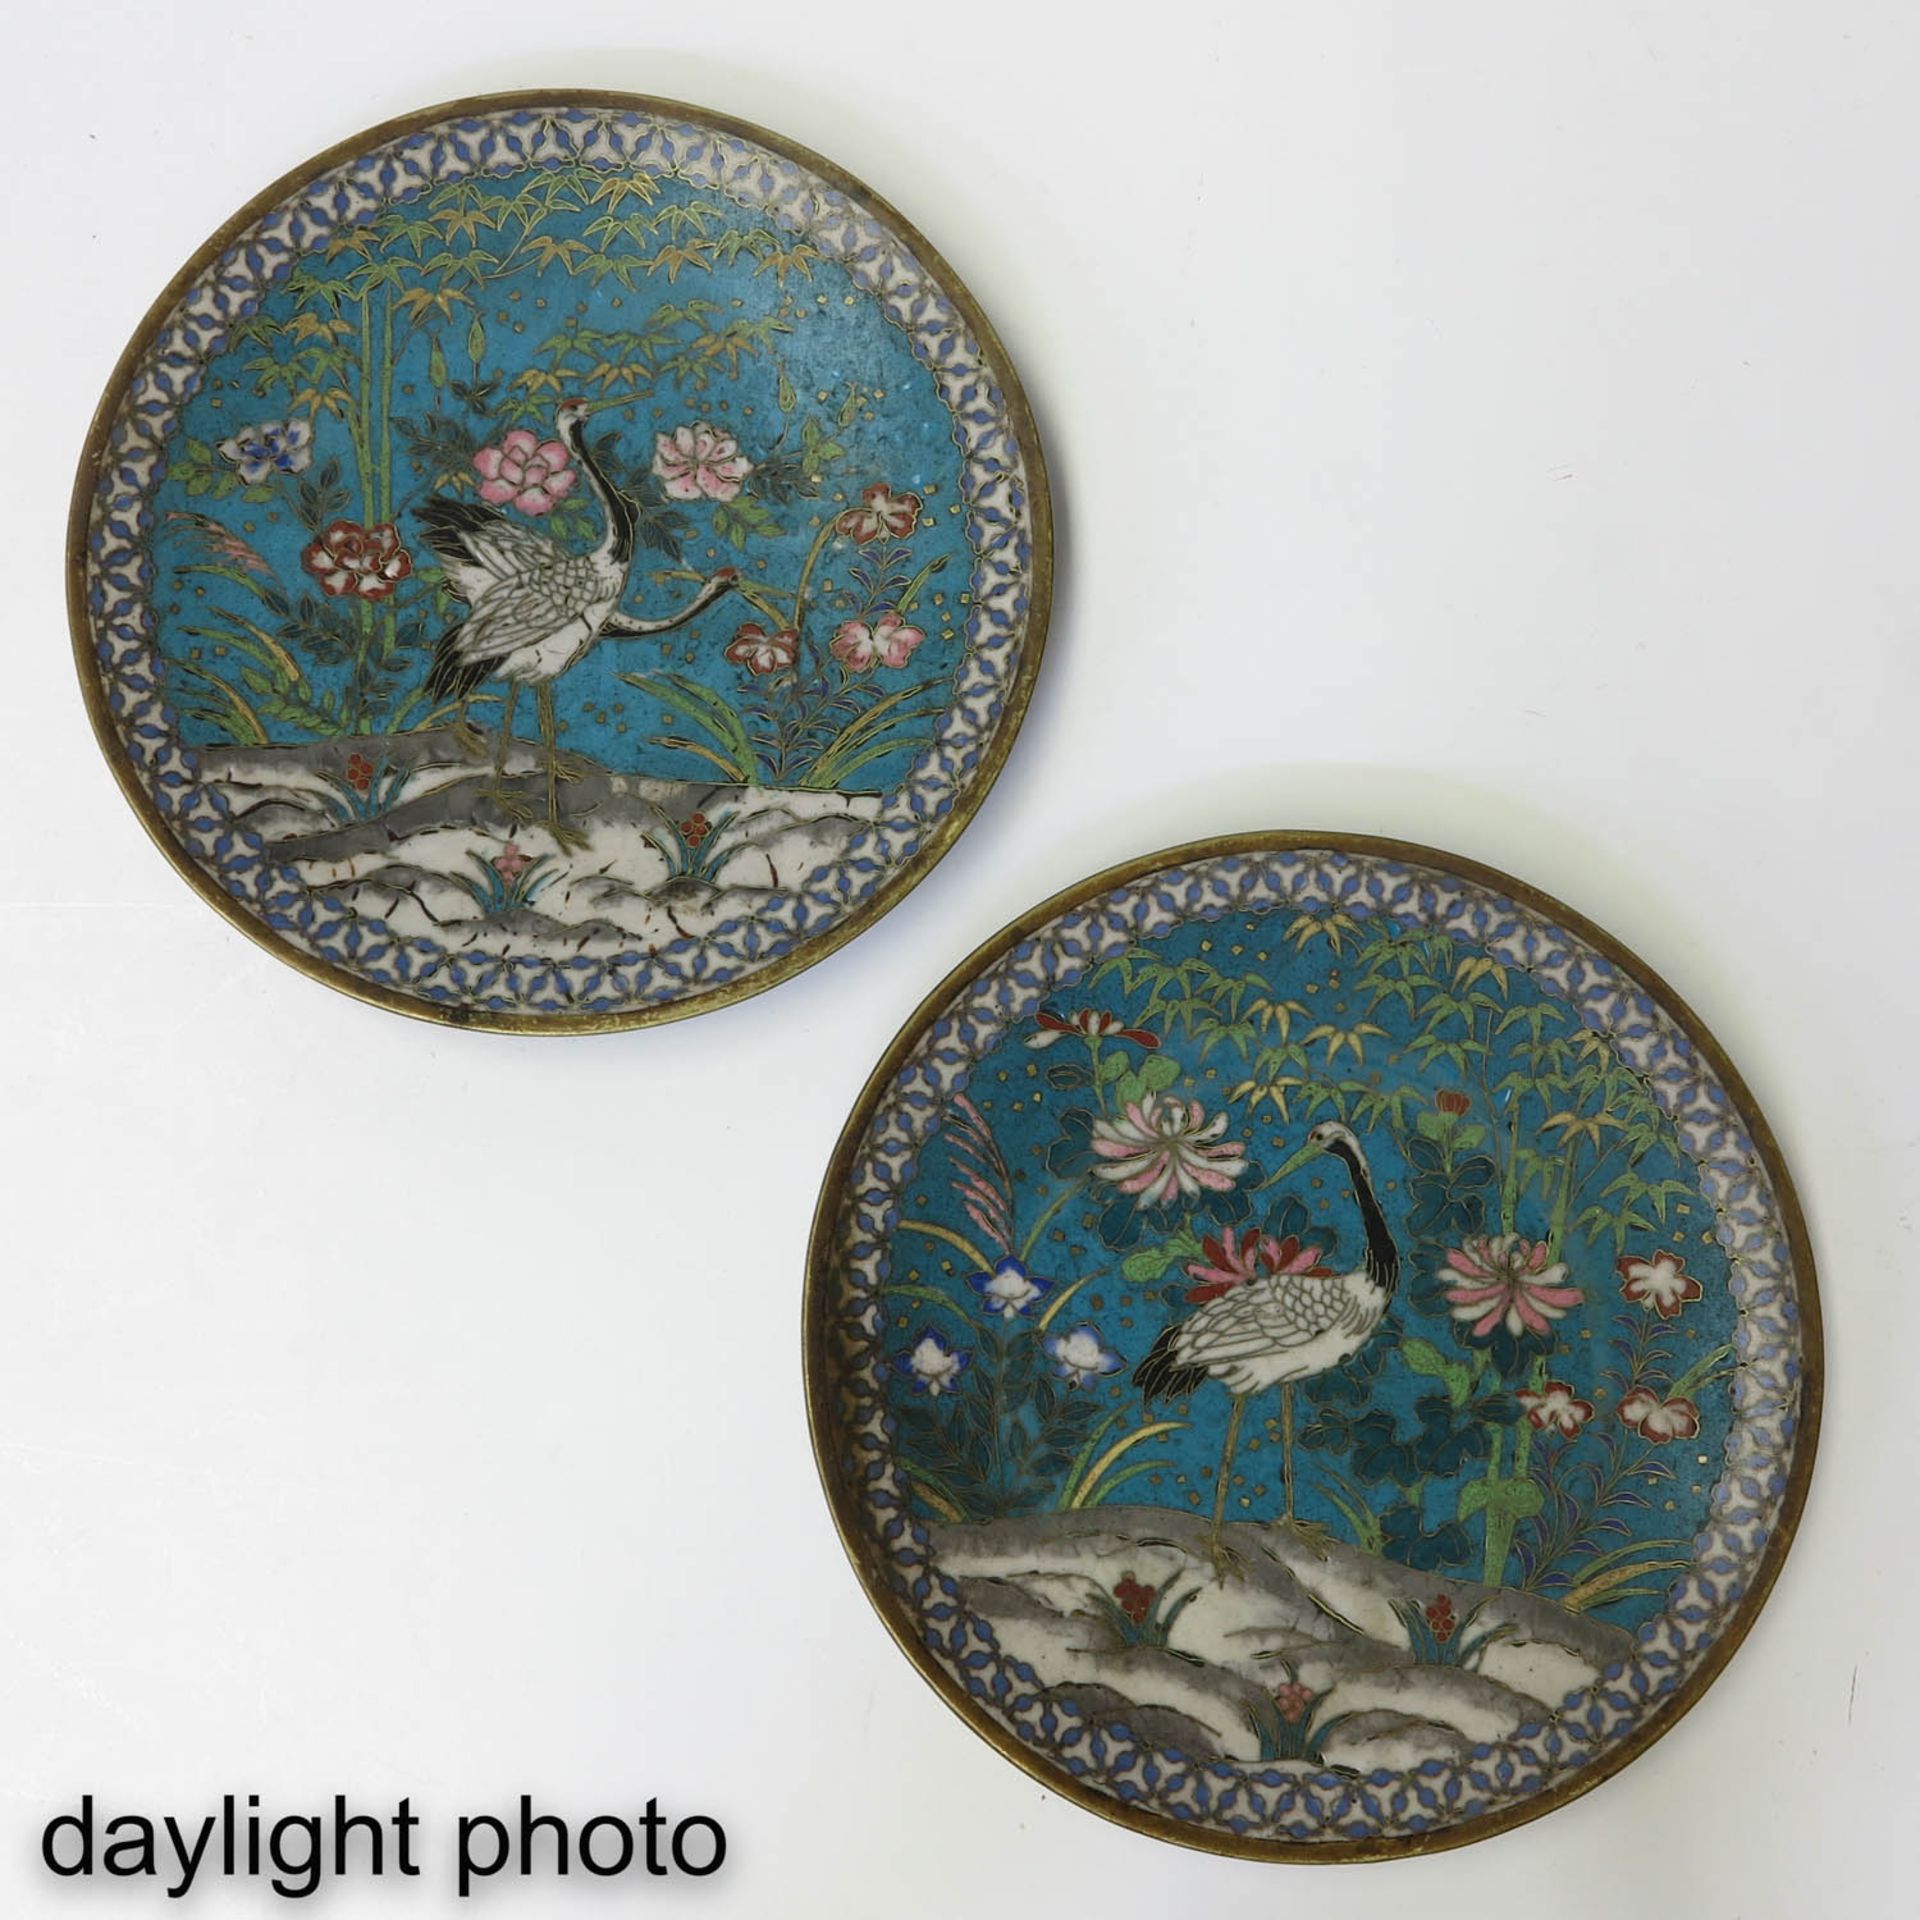 A Lot of 2 Cloisonne Plates - Image 7 of 10